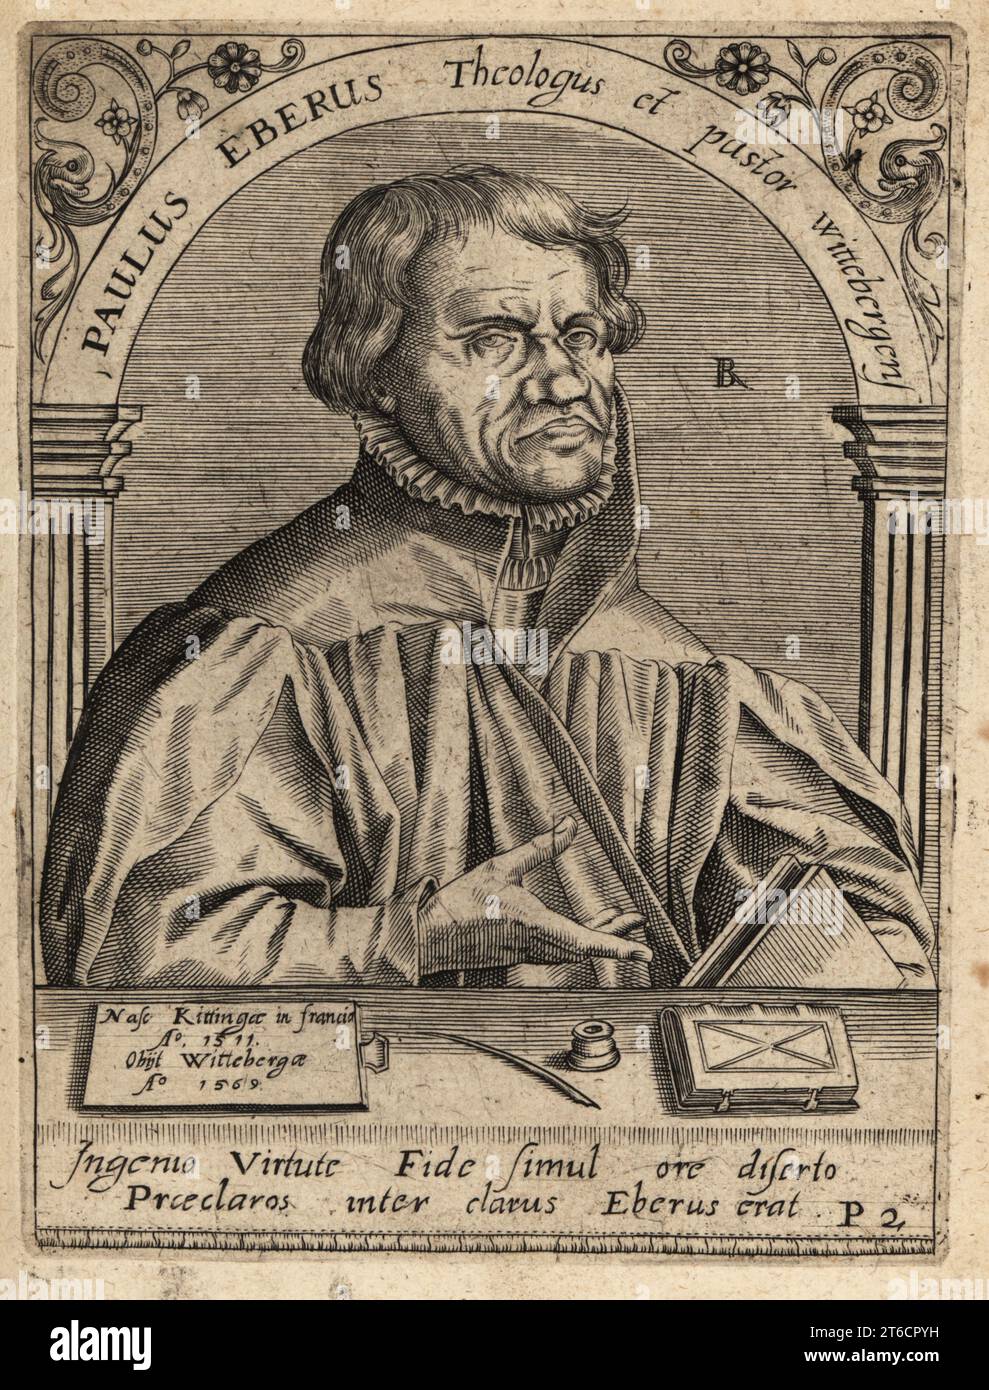 Paul Eber, 1511-1569, German Lutheran theologian, reformer and hymnwriter. Paulus Eberus Theologus et pastor wittebergensis. Copperplate engraving by Johann Theodore de Bry from Jean-Jacques Boissards Bibliotheca Chalcographica, Johann Ammonius, Frankfurt, 1650. Stock Photo